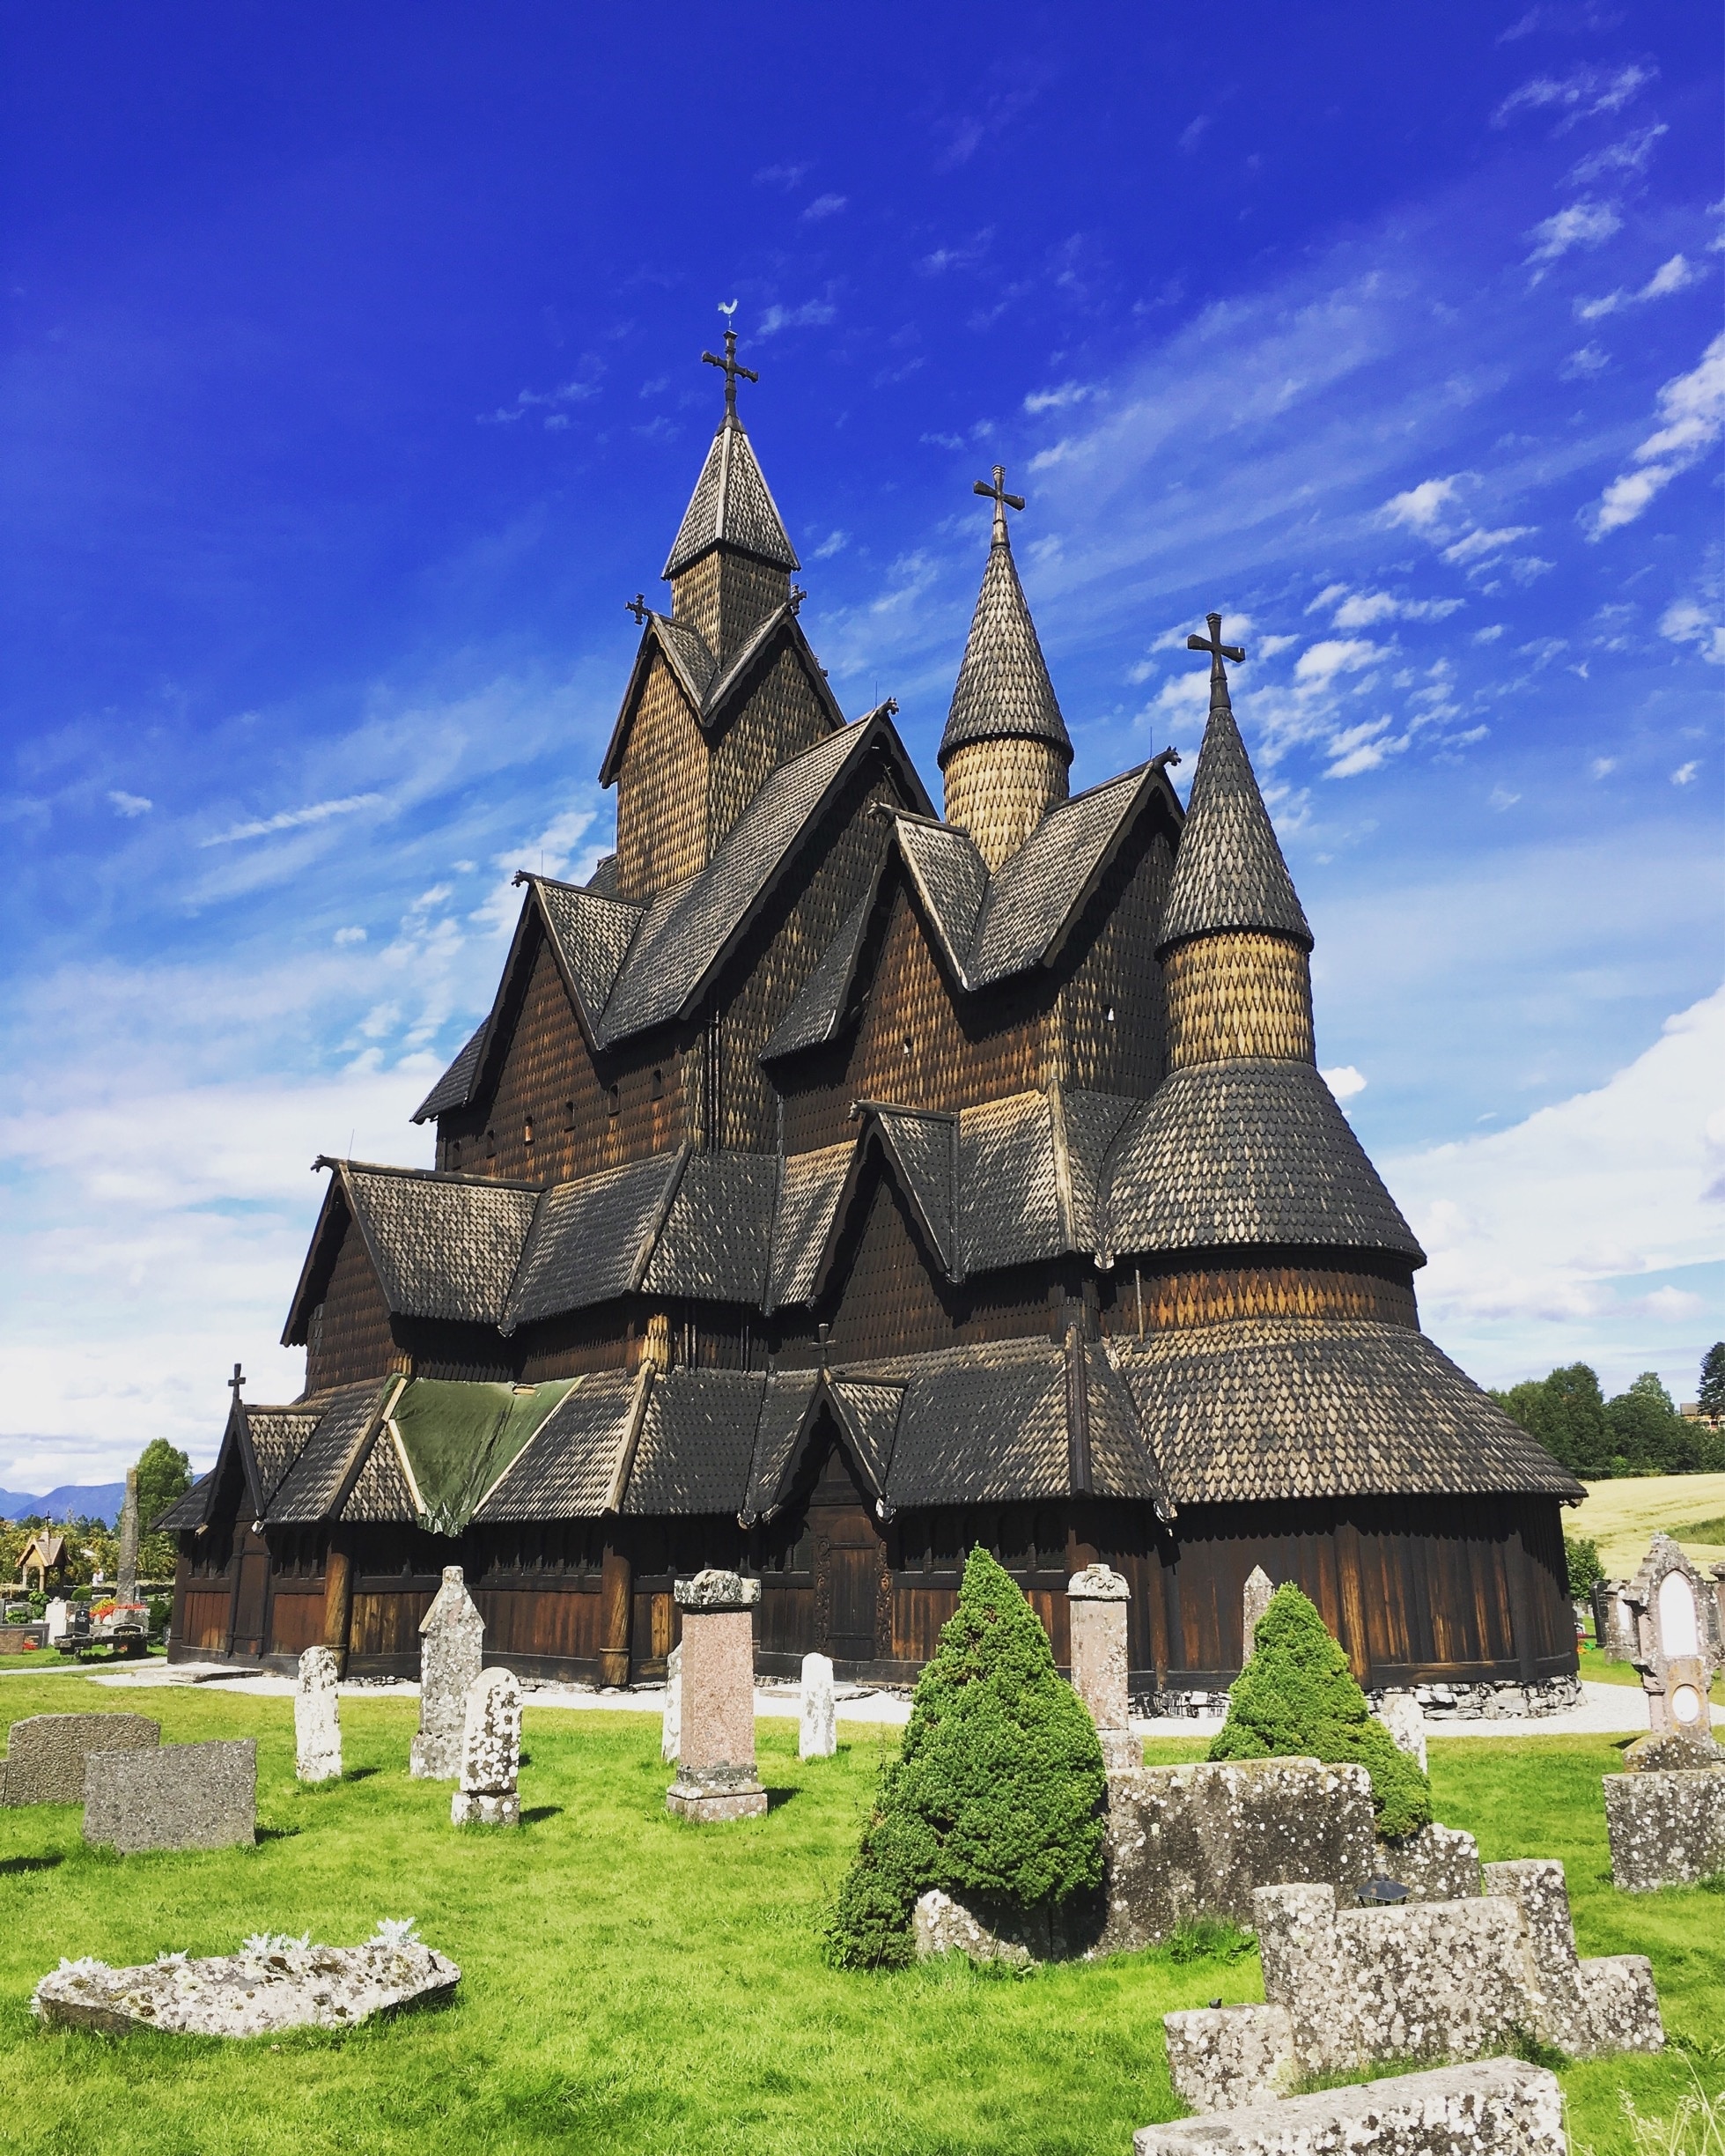 Norway's biggest Stave Church